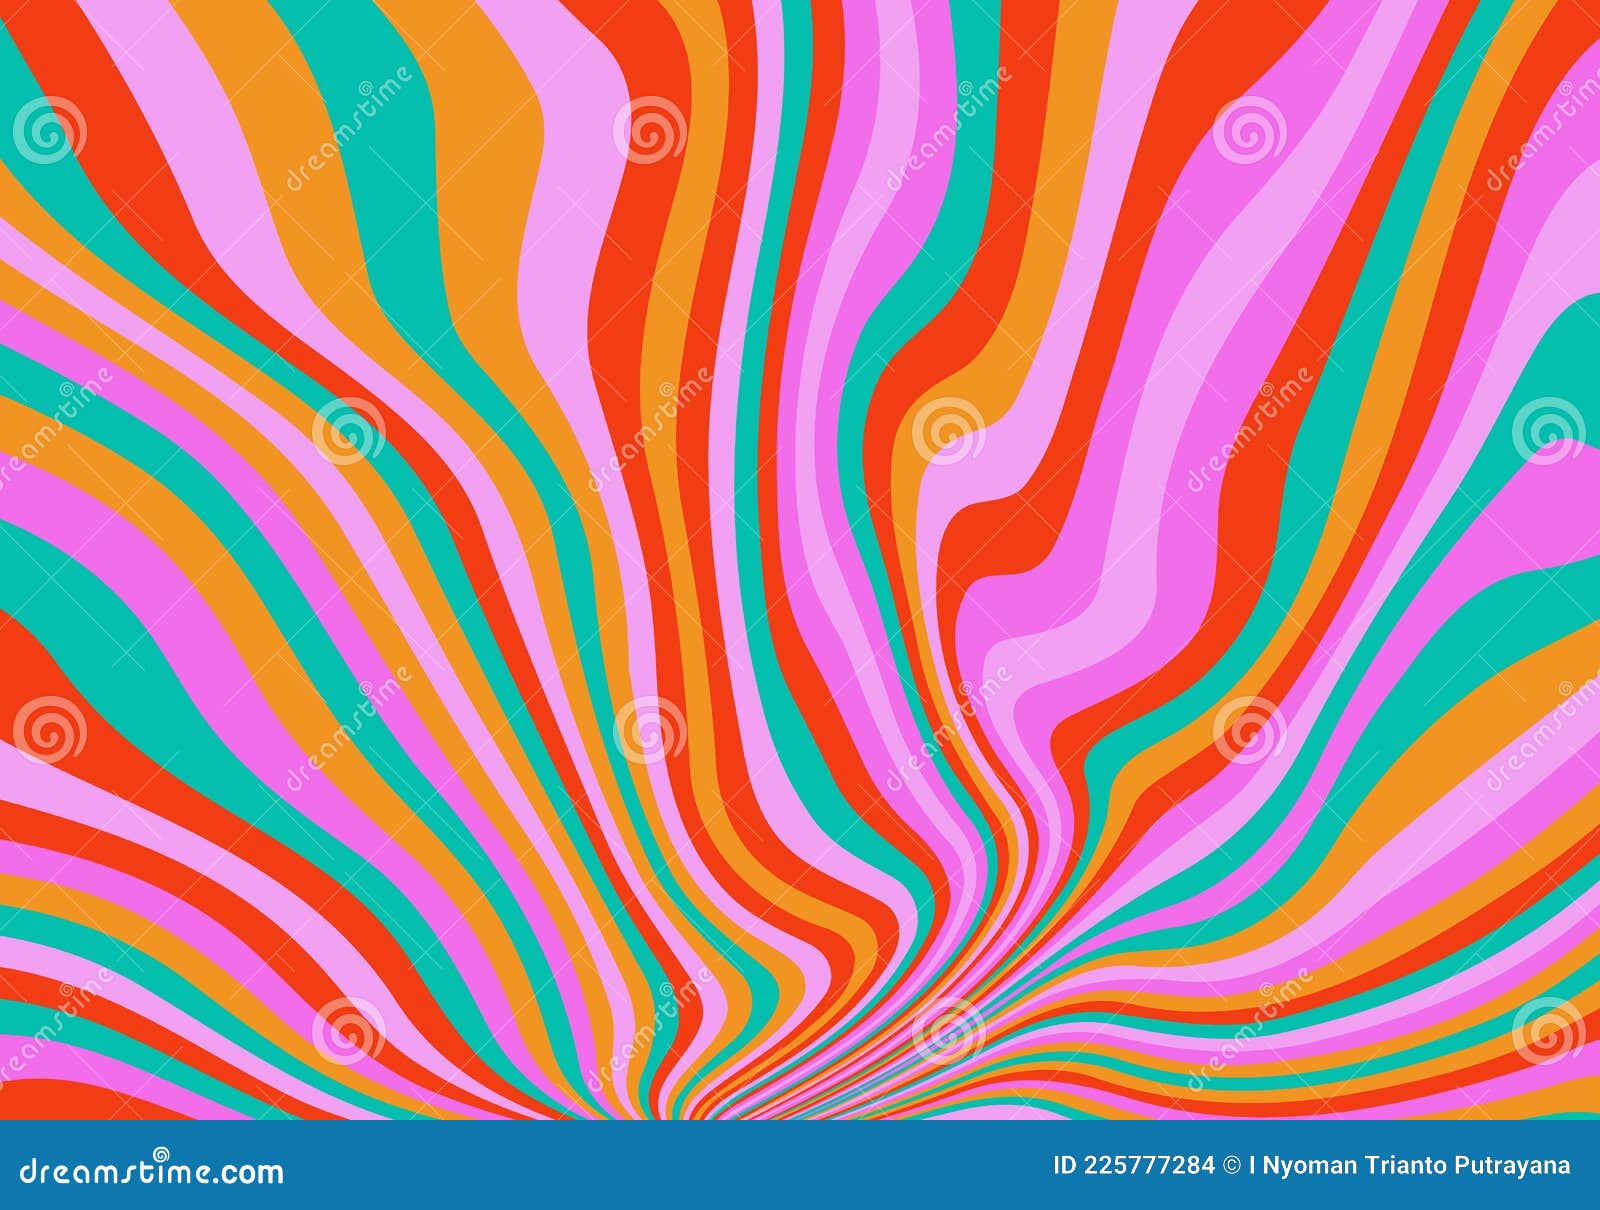 Abstract Psychedelic Groovy Background. Vector Stock Vector ...